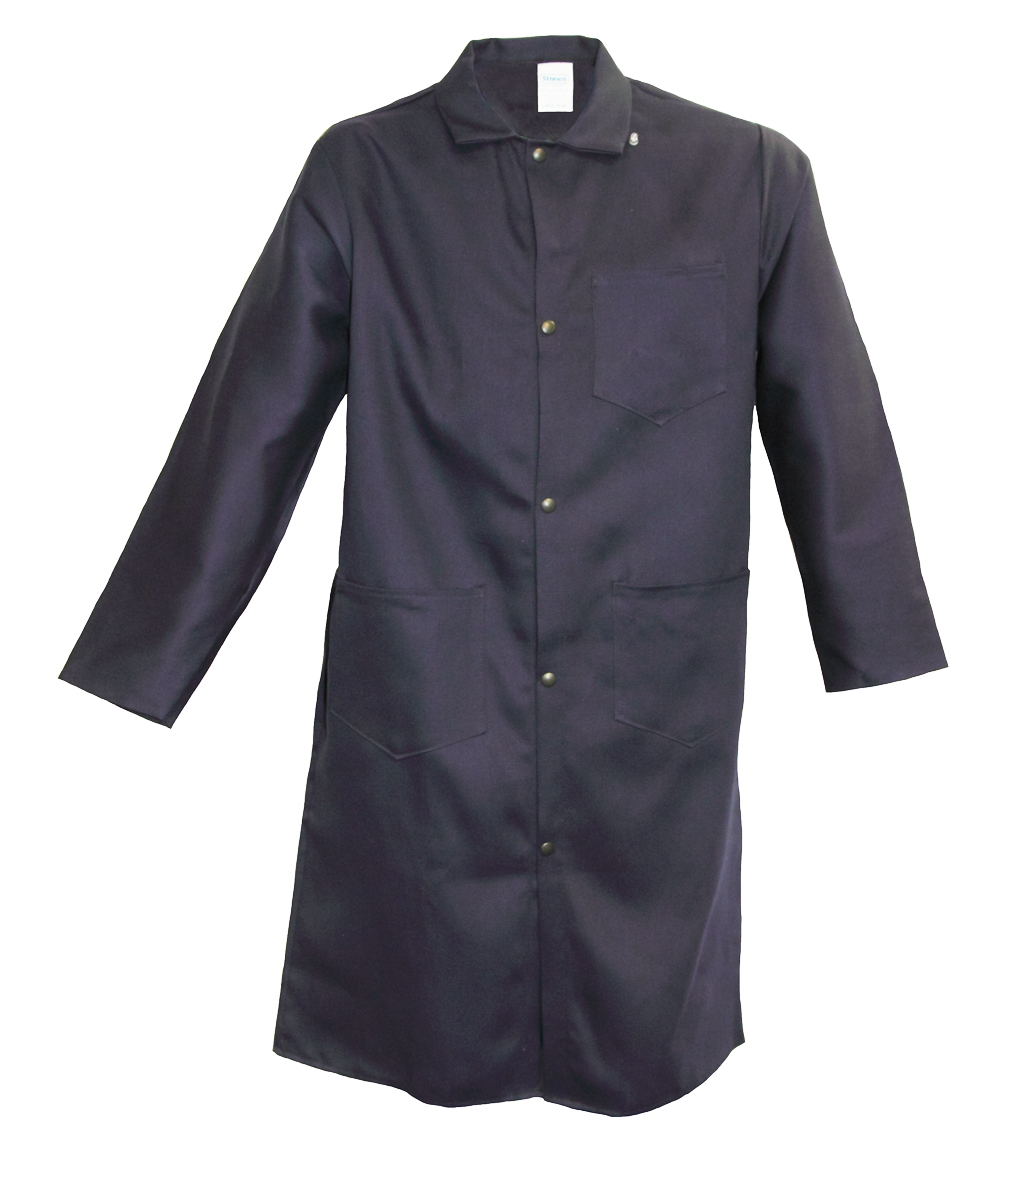 Stanco Safety Products™ 4X Navy Blue Indura® Cotton Flame Resistant Lab Coat